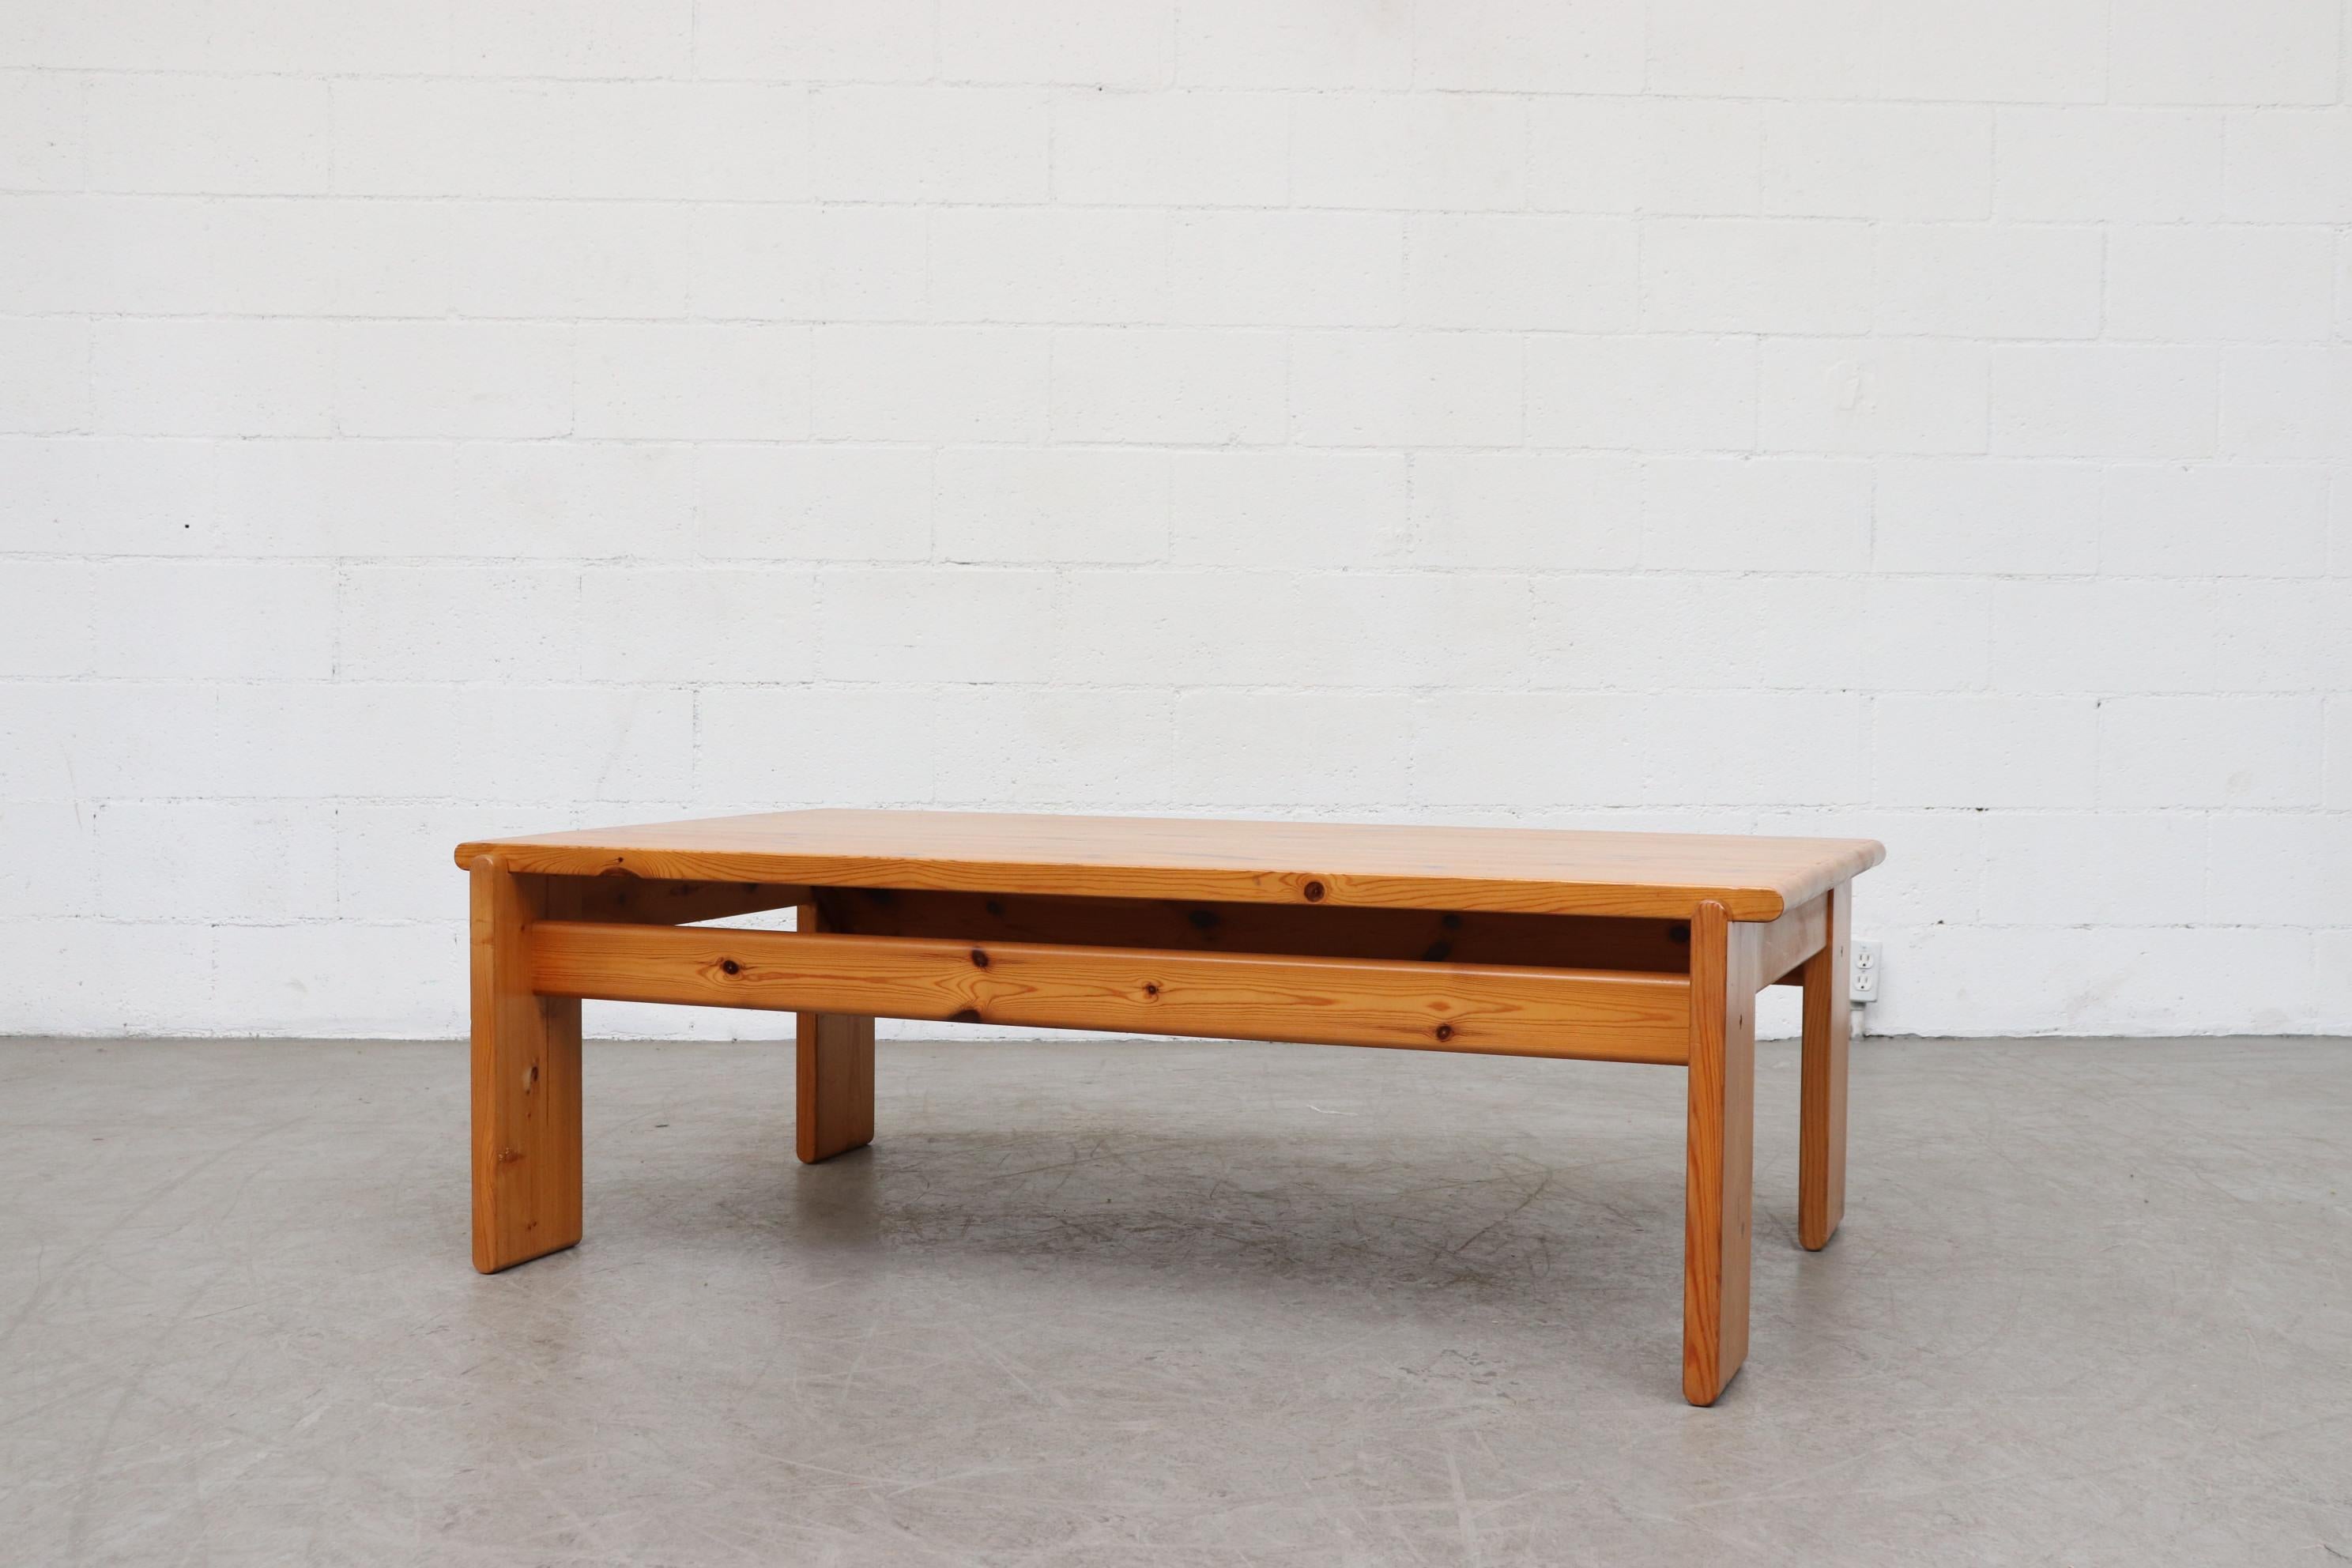 Handsome Yngve Ekström pine coffee table. Lightly refinished. In good original condition with minimal signs of wear. Matching sofas available (LU922413509852 + LU922413509752) and listed separately.